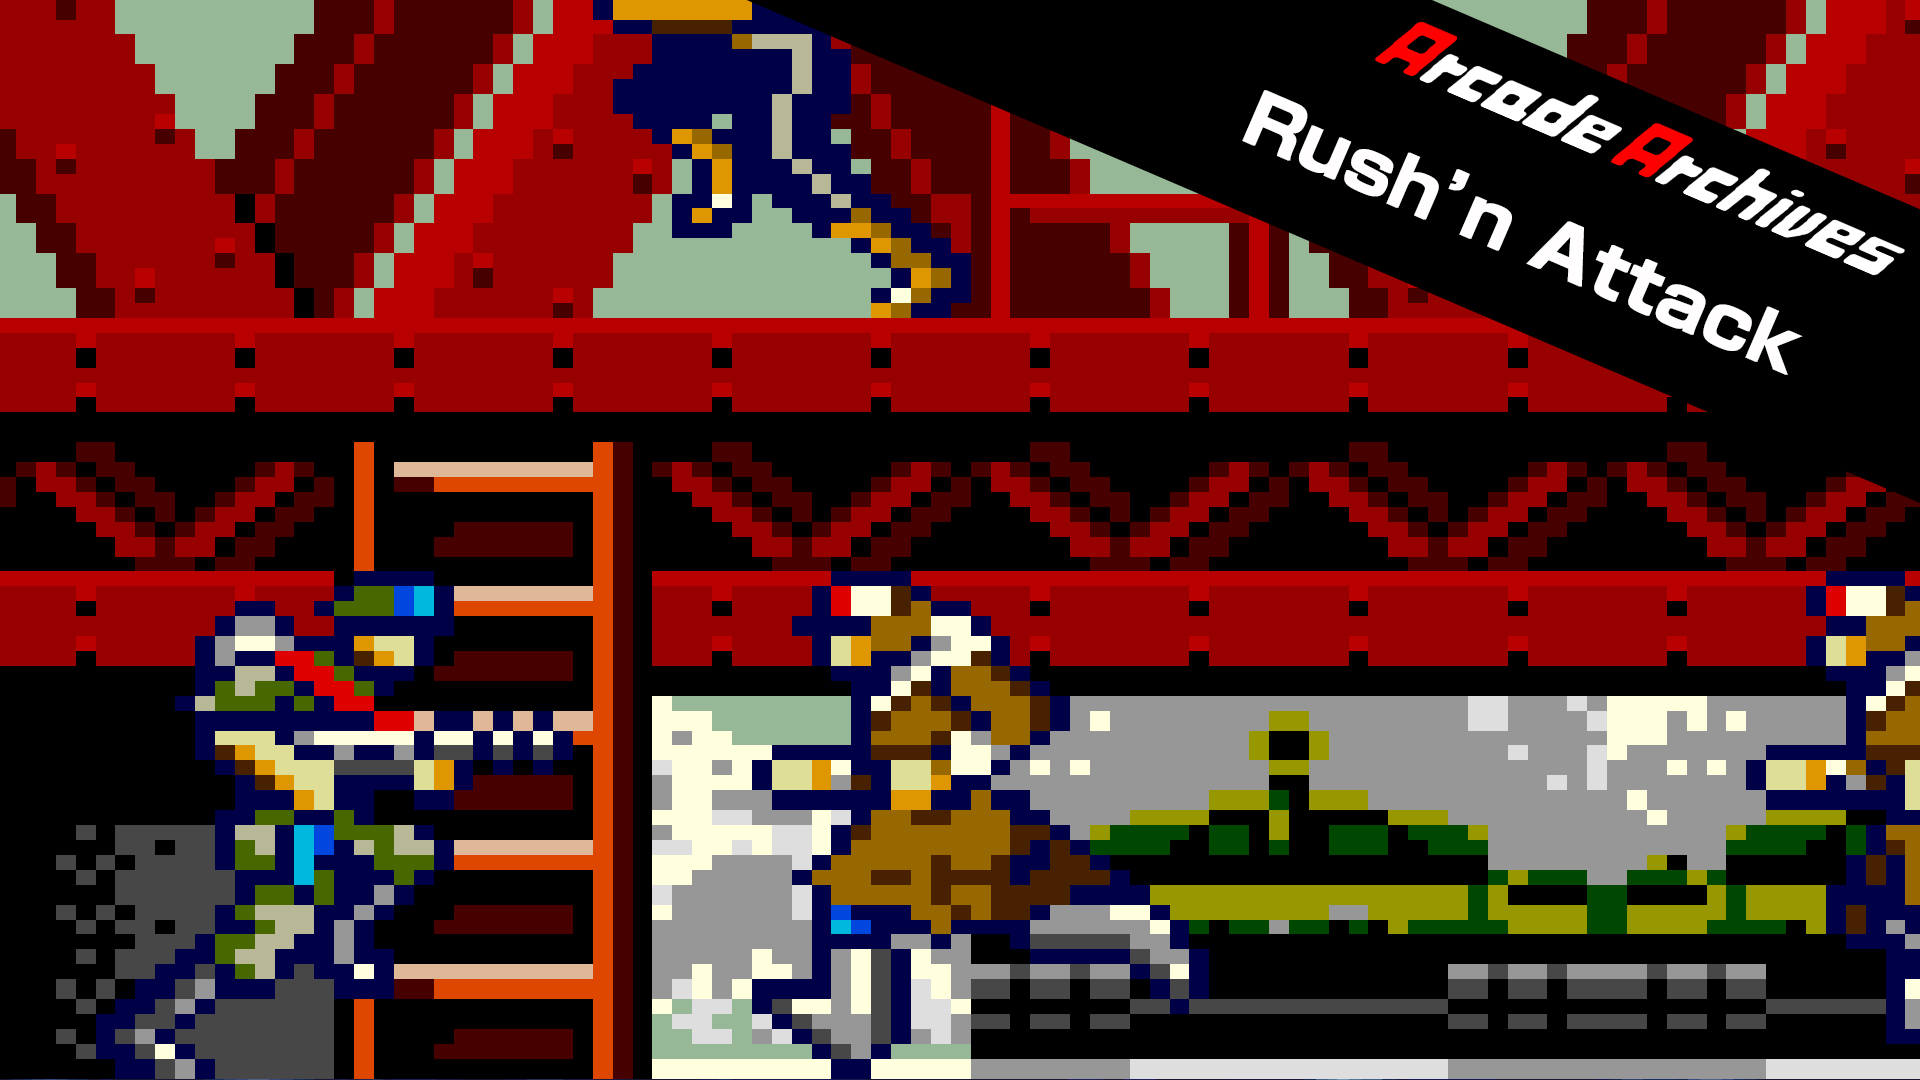 Нападение т. Rush'n Attack NES. Yie ar Kung-Fu NES. Green Berets игра. Panzer Attack NES.